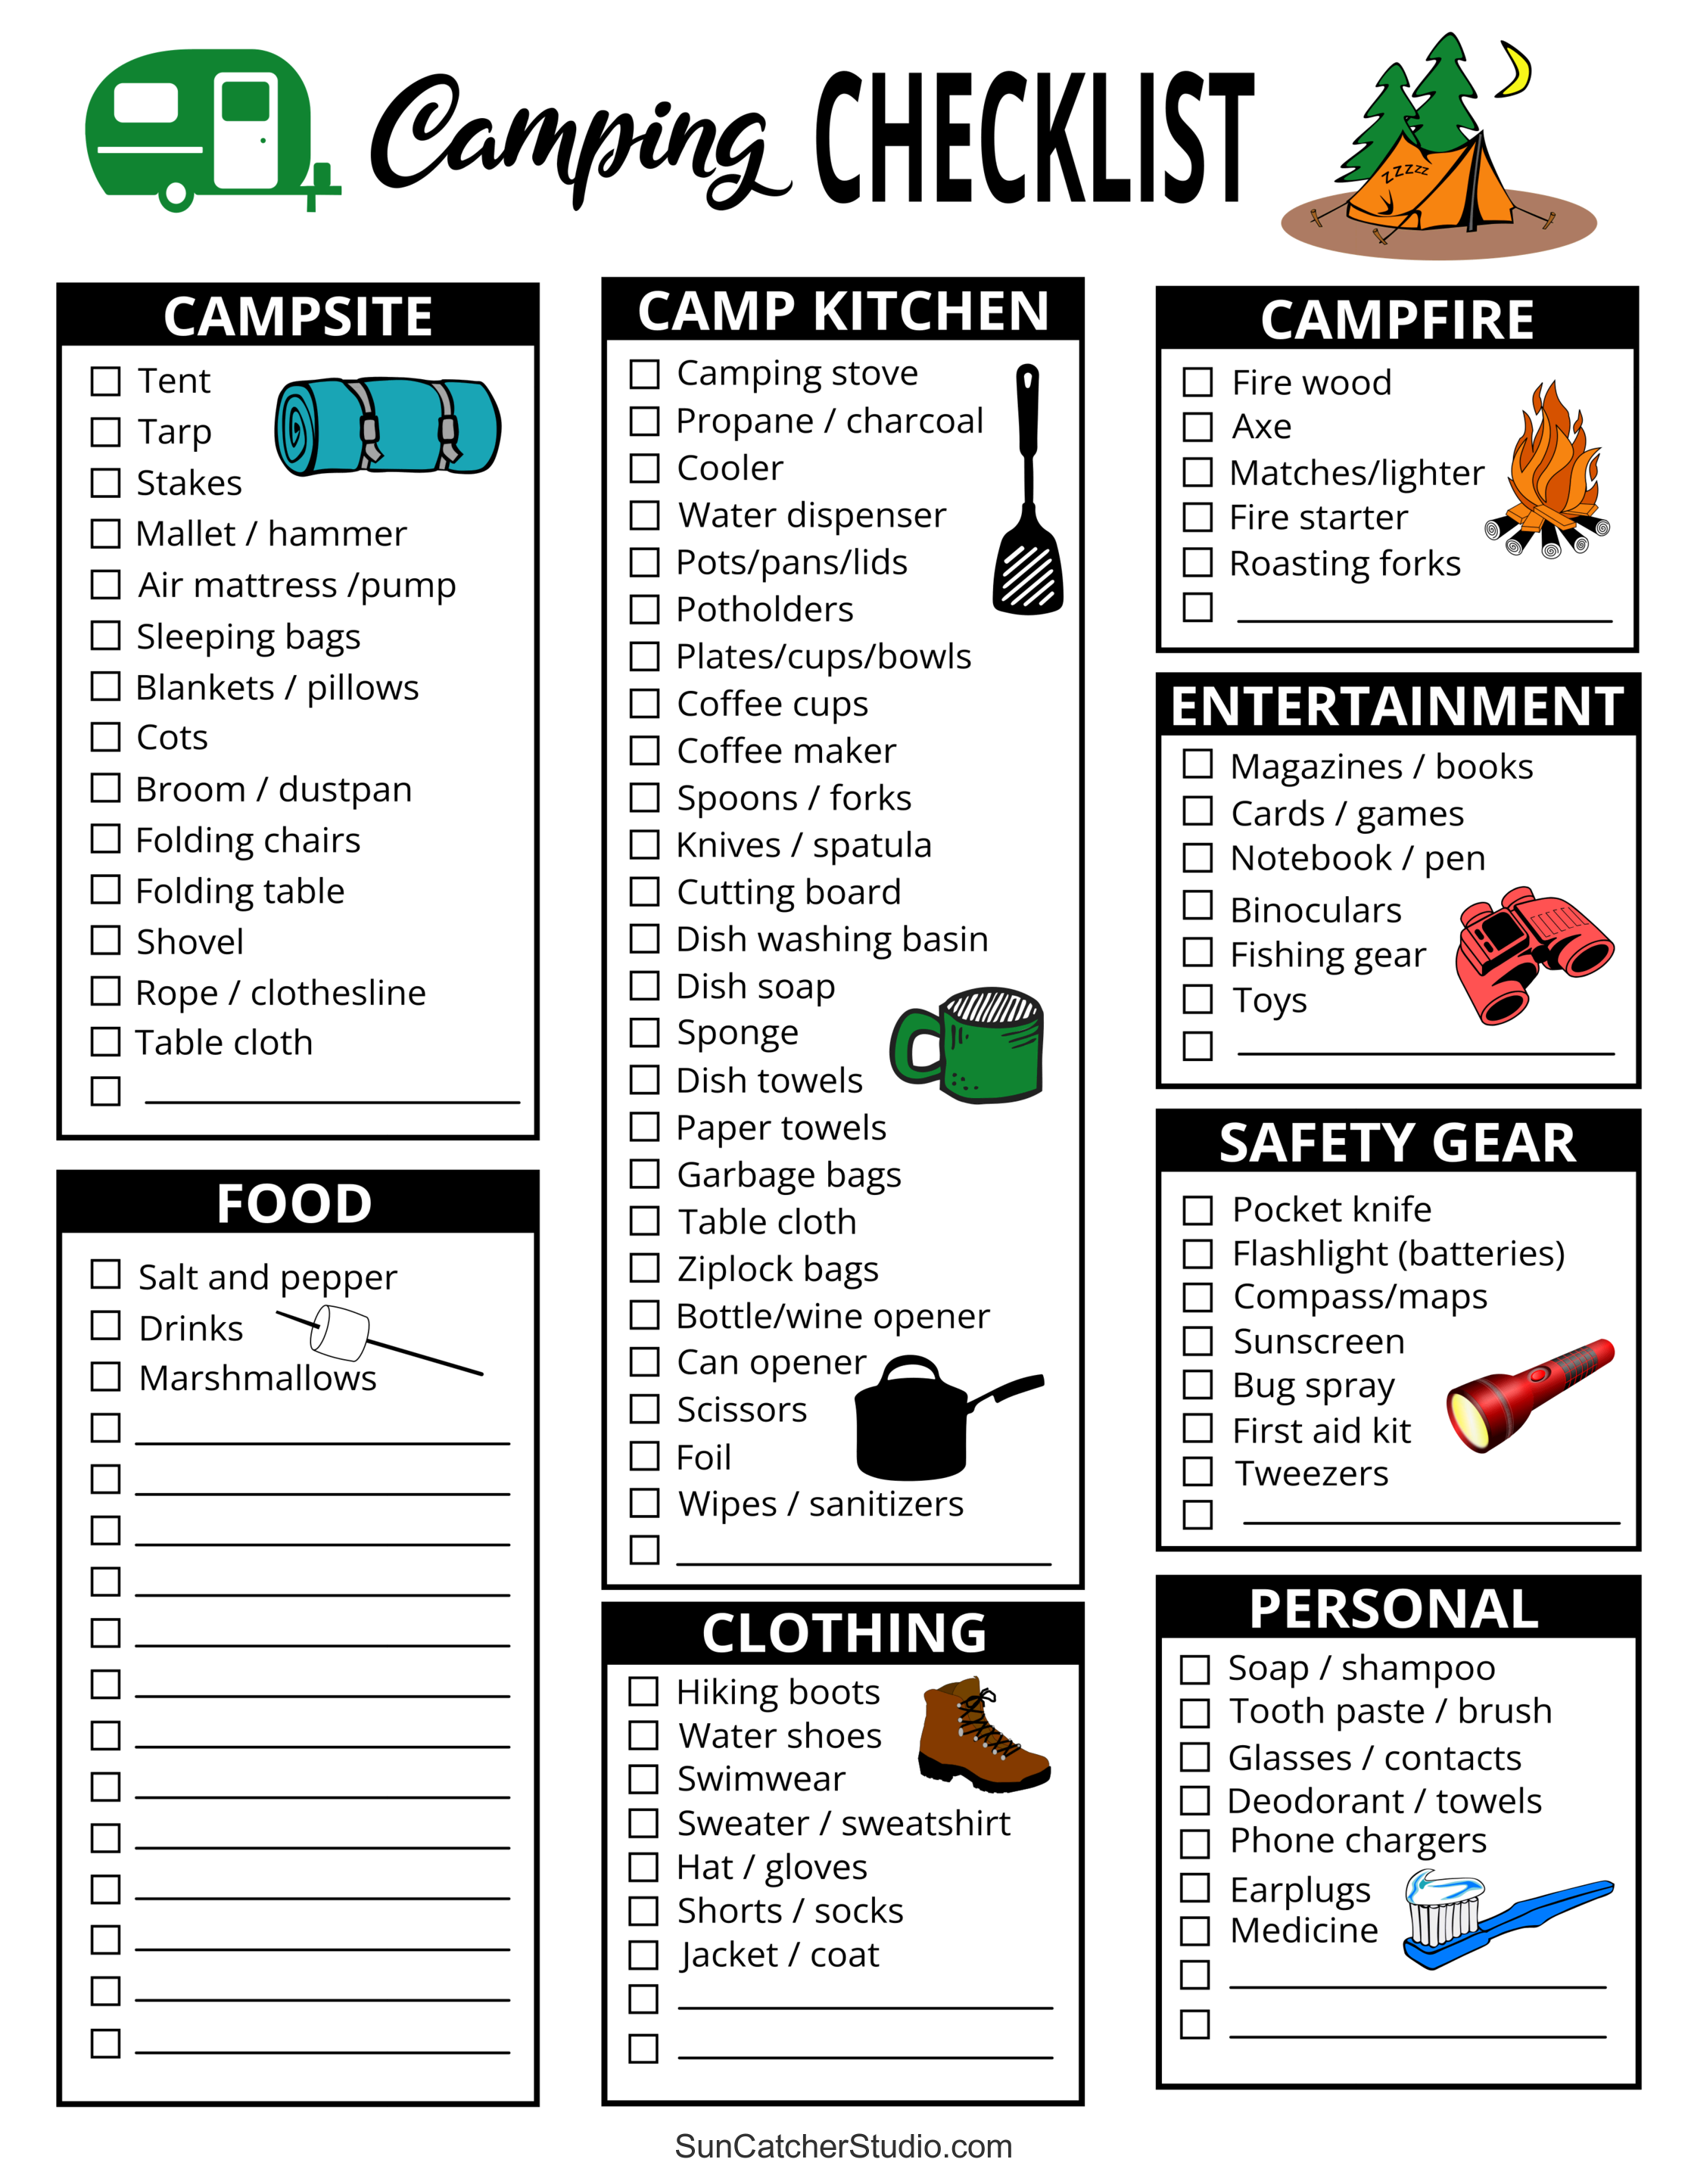 camping-checklist-camping-essentials-meals-diy-projects-patterns